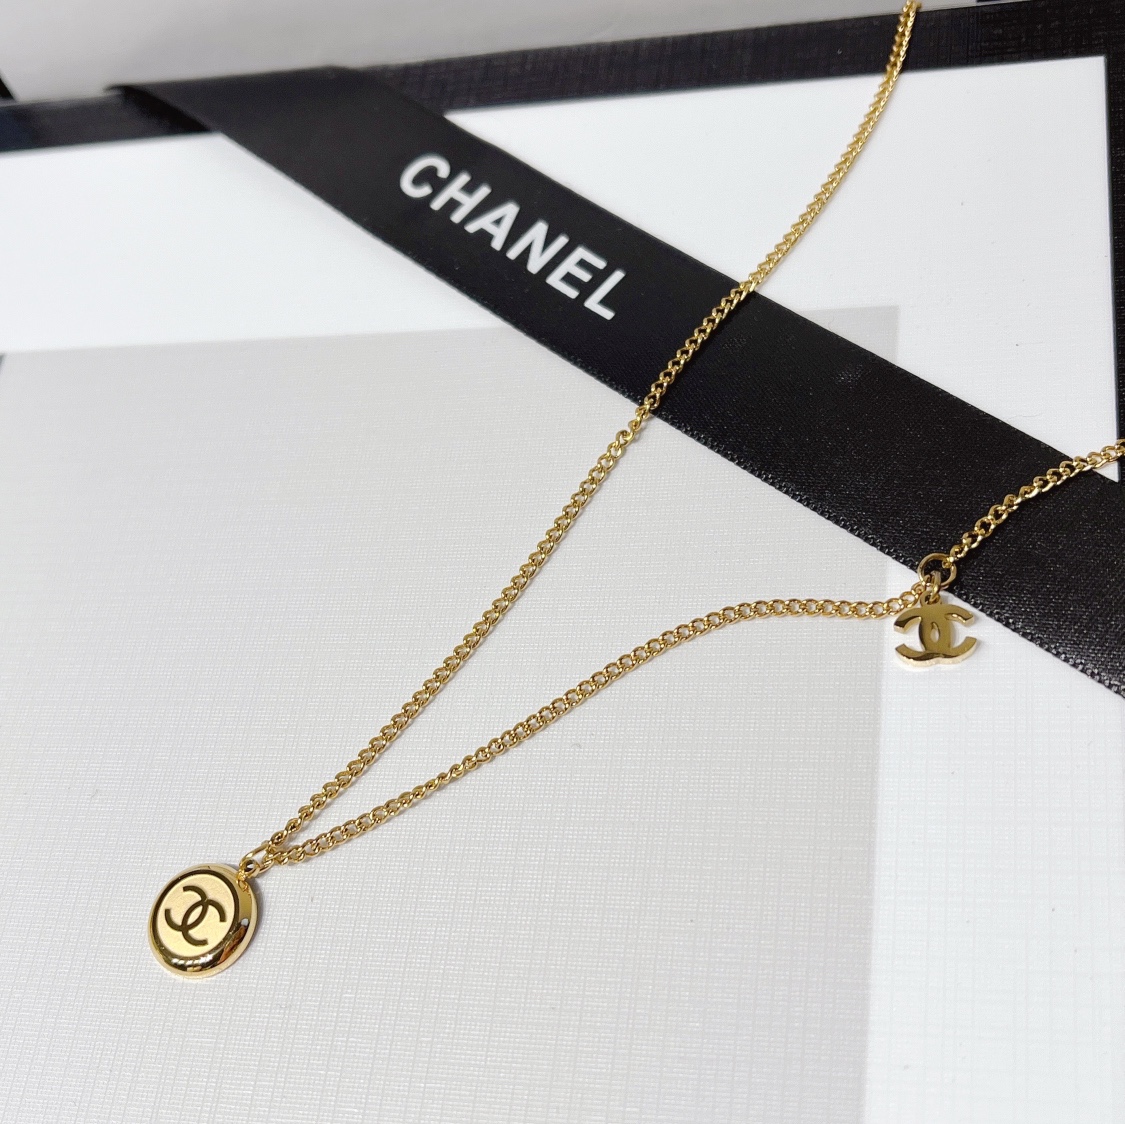 X430   Chanel necklace 108763